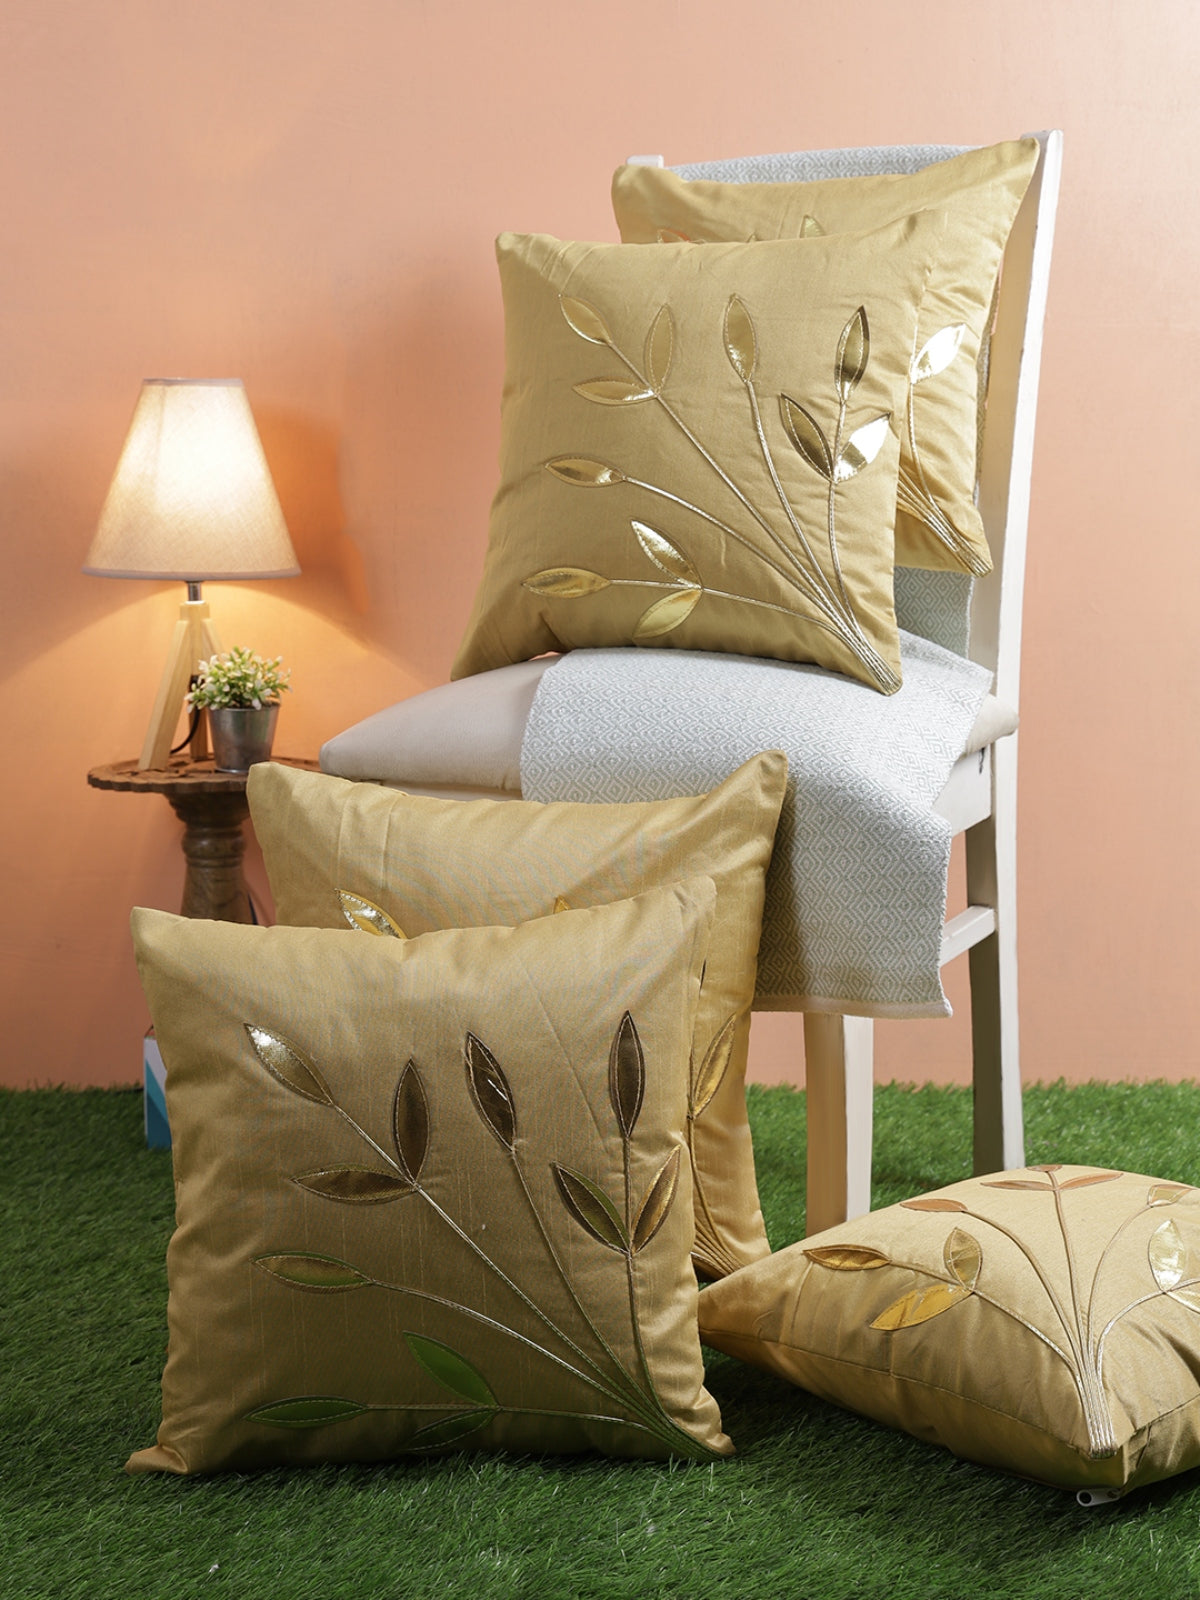 Beige Set of 5 Polyester 16 Inch x 16 Inch Cushion Covers